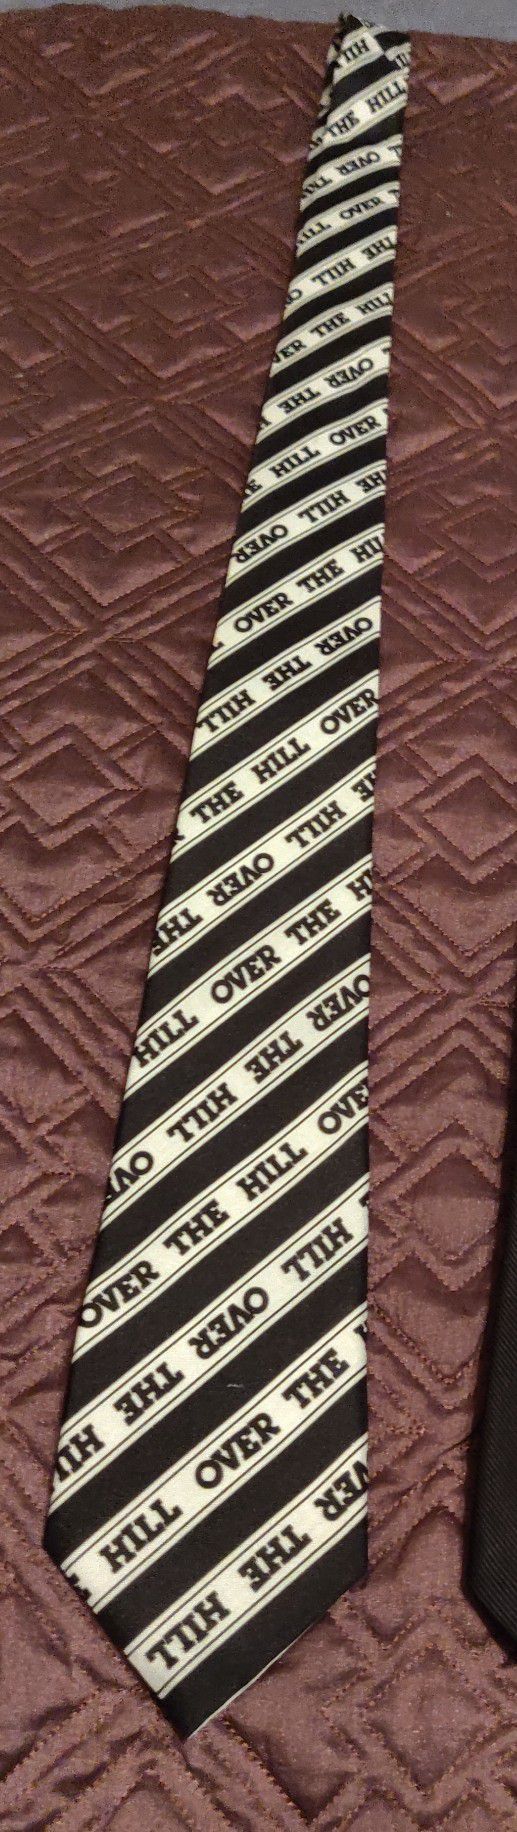 Black and White "Over The Hill" Tie